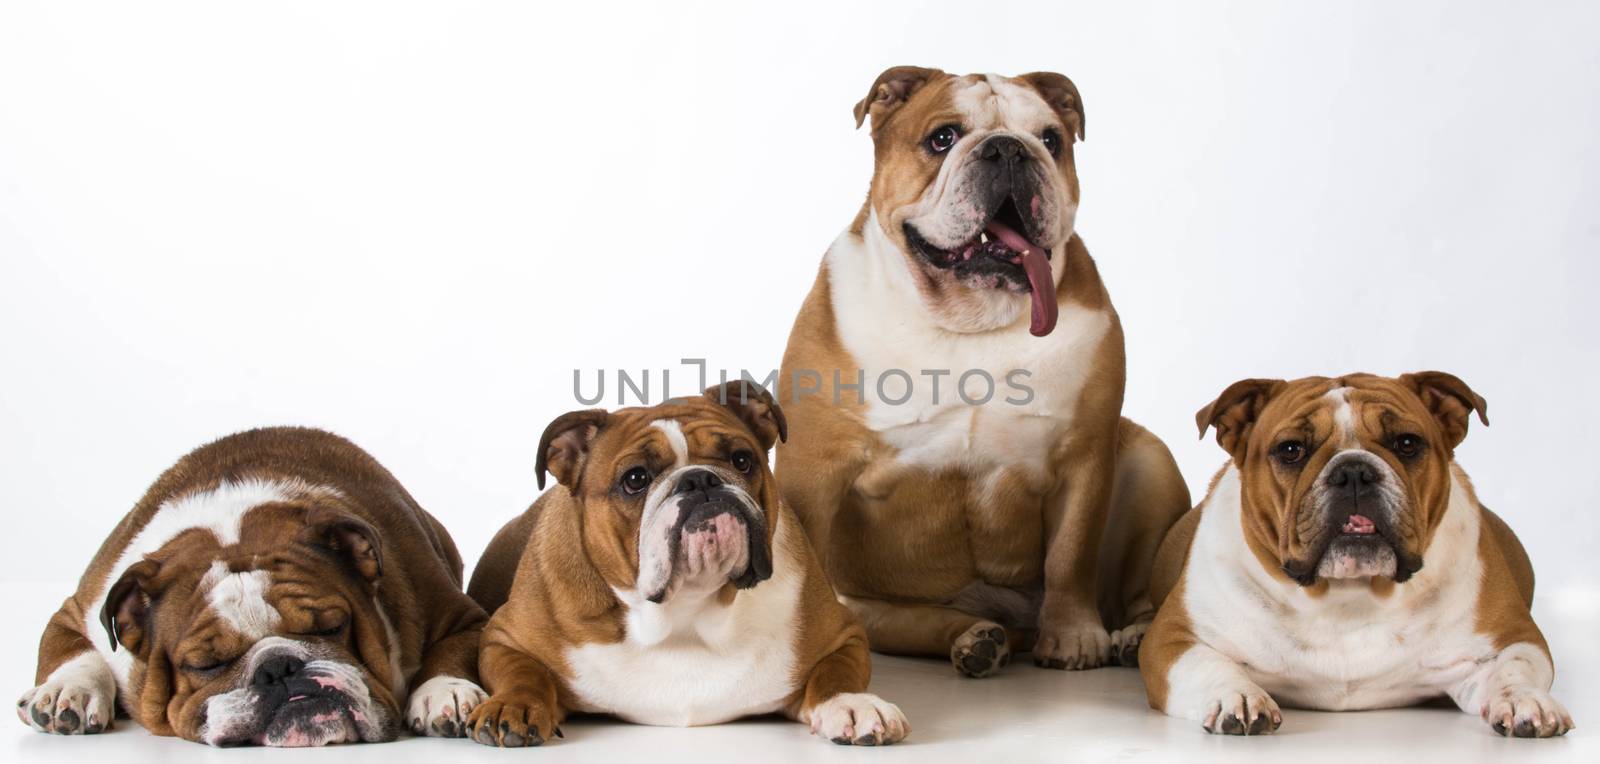 four english bulldogs together on white background